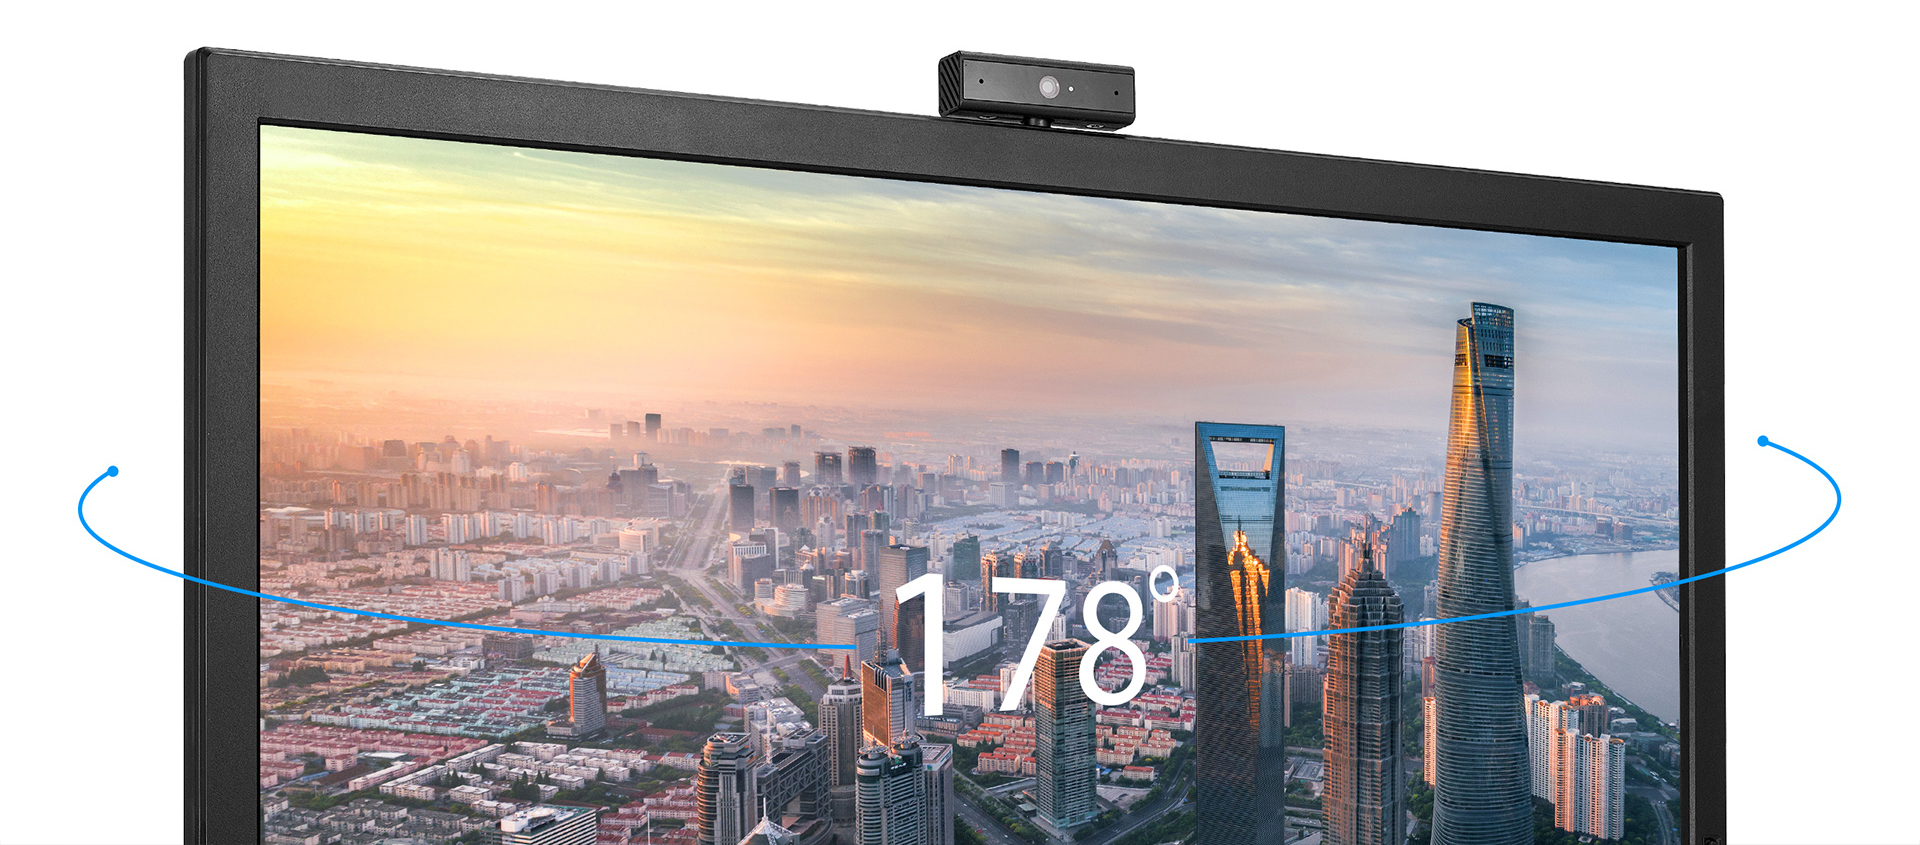 BE24DQLB offers Full HD resolution to deliver stunning clarity.